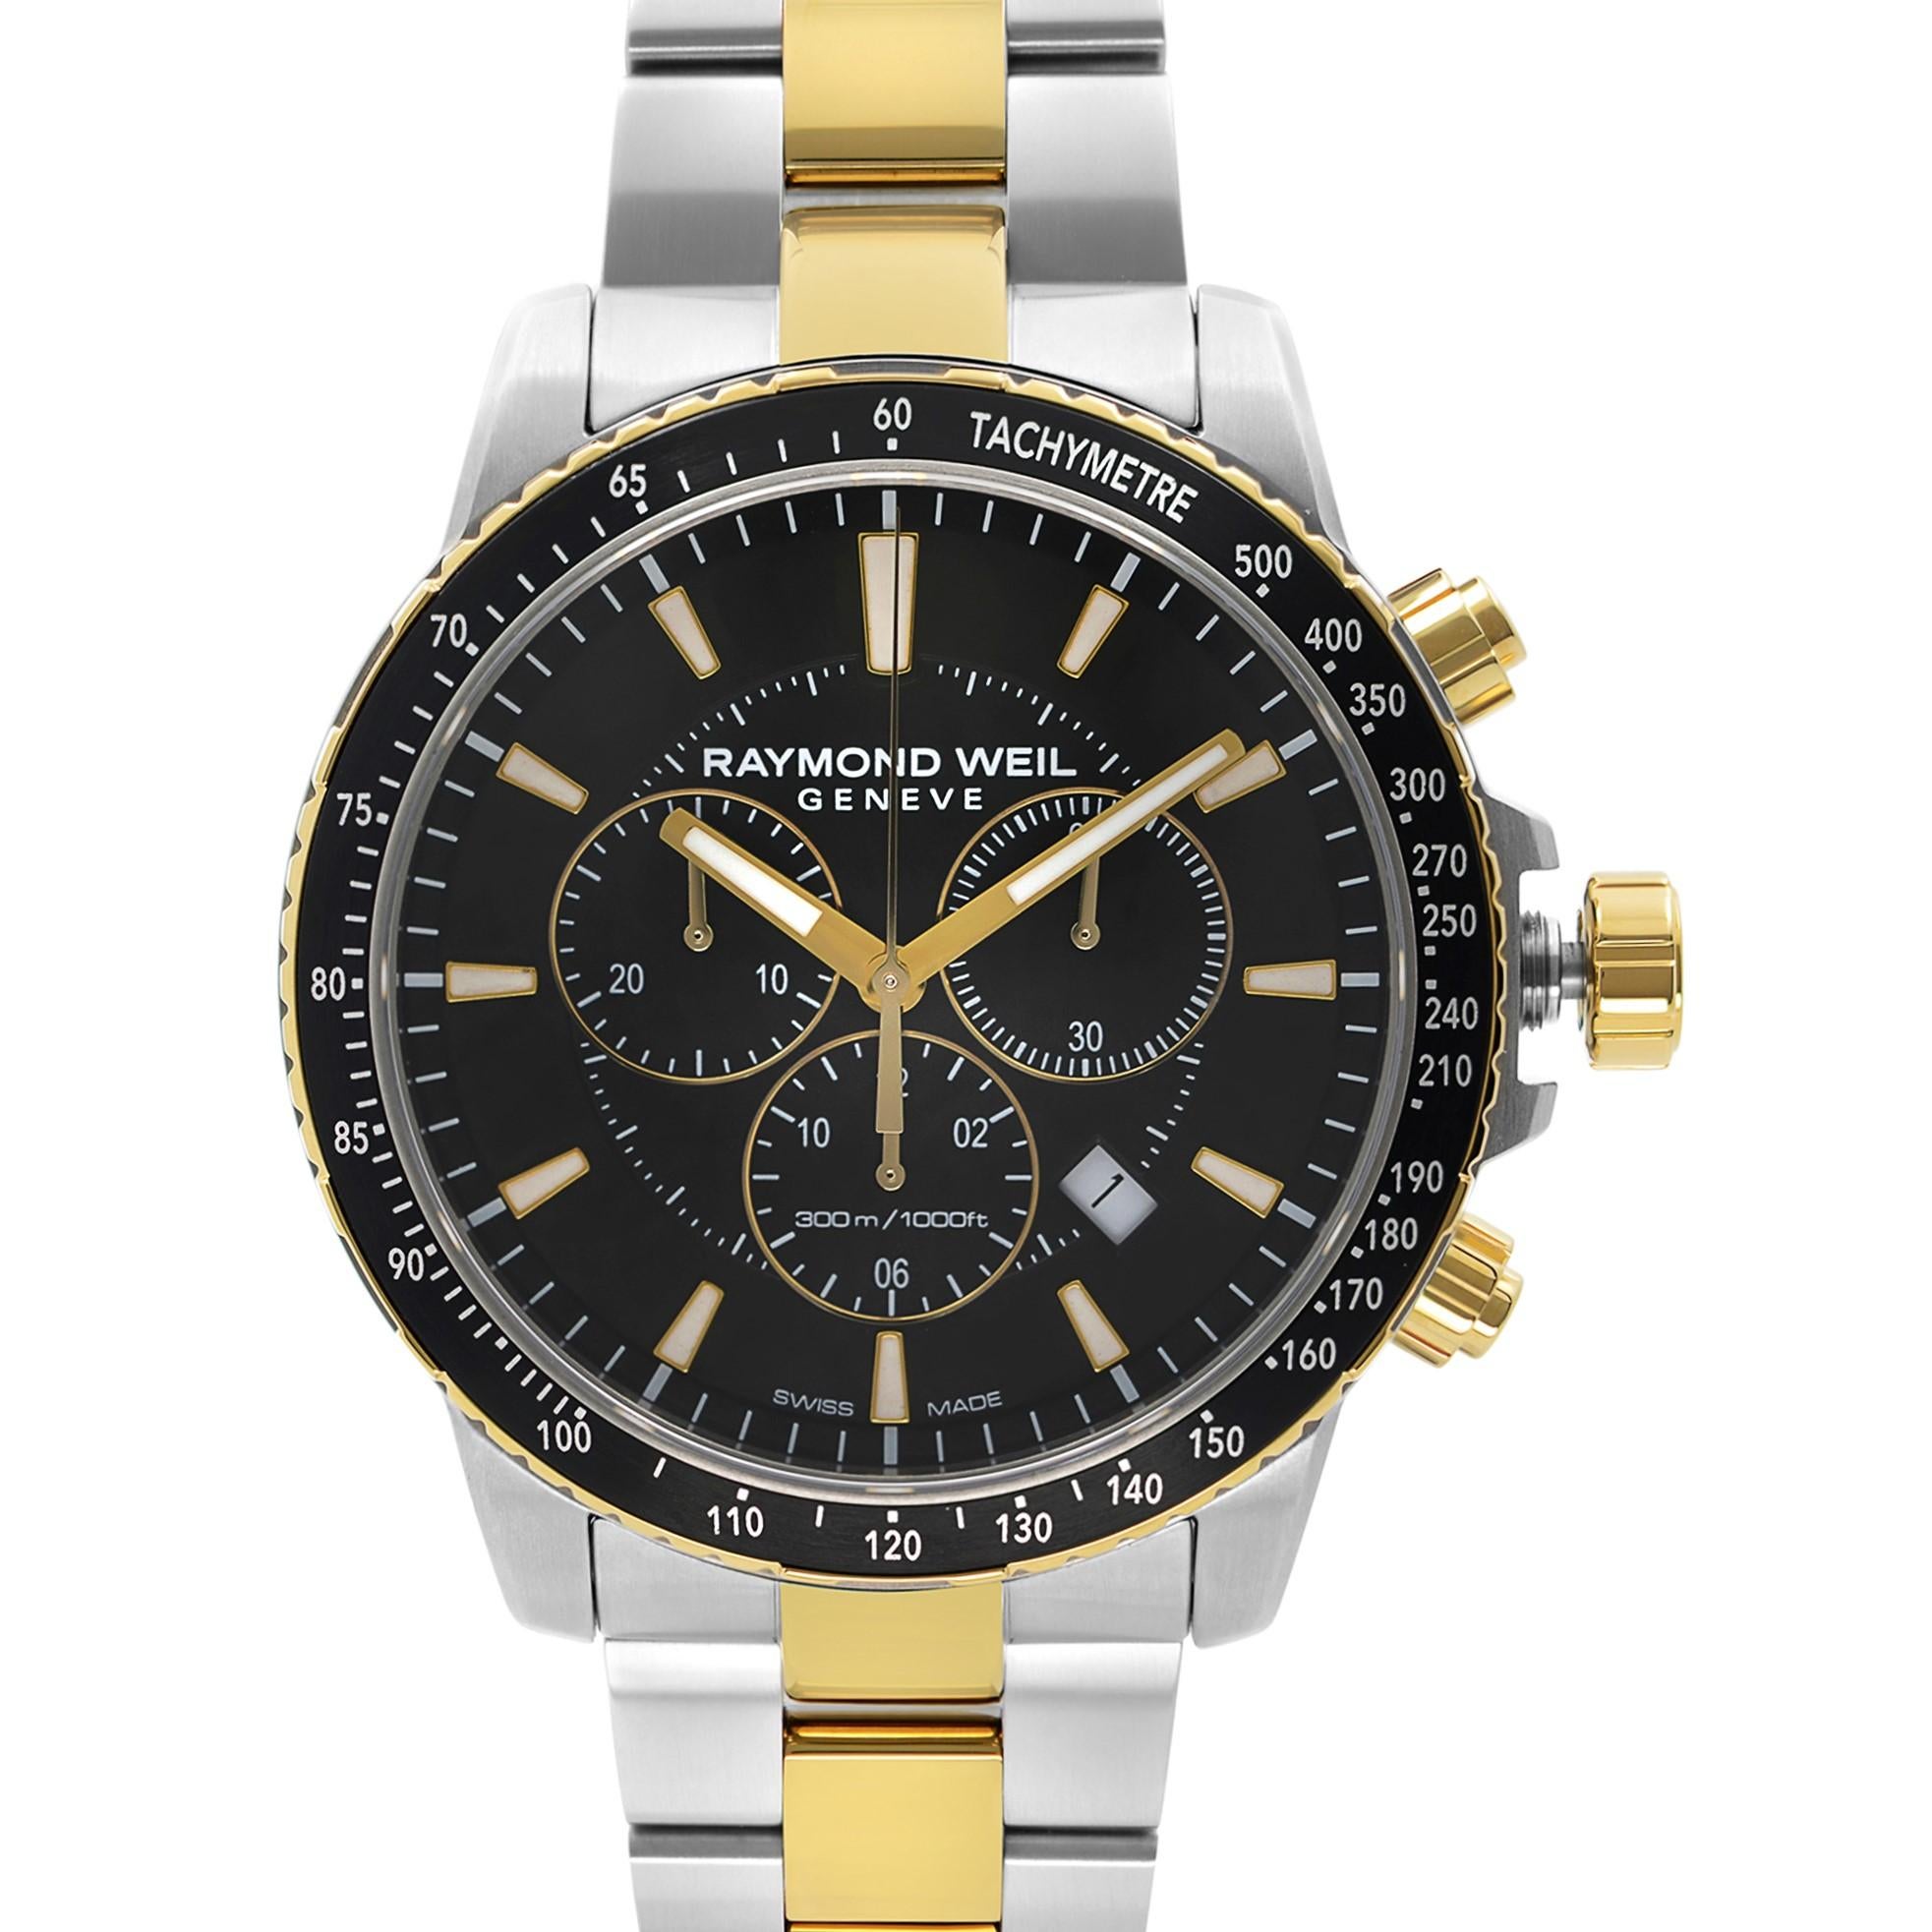 New with Defects Raymond Weil Tango Two-Tone Steel Black Dial Quartz Men's Watch. The Band Has Minor Blemishes on the Gold PVD Links and the Bezel Insert Shows Insignificant Dents at the Edge Due to Store Handling. This Beautiful Timepiece Features: